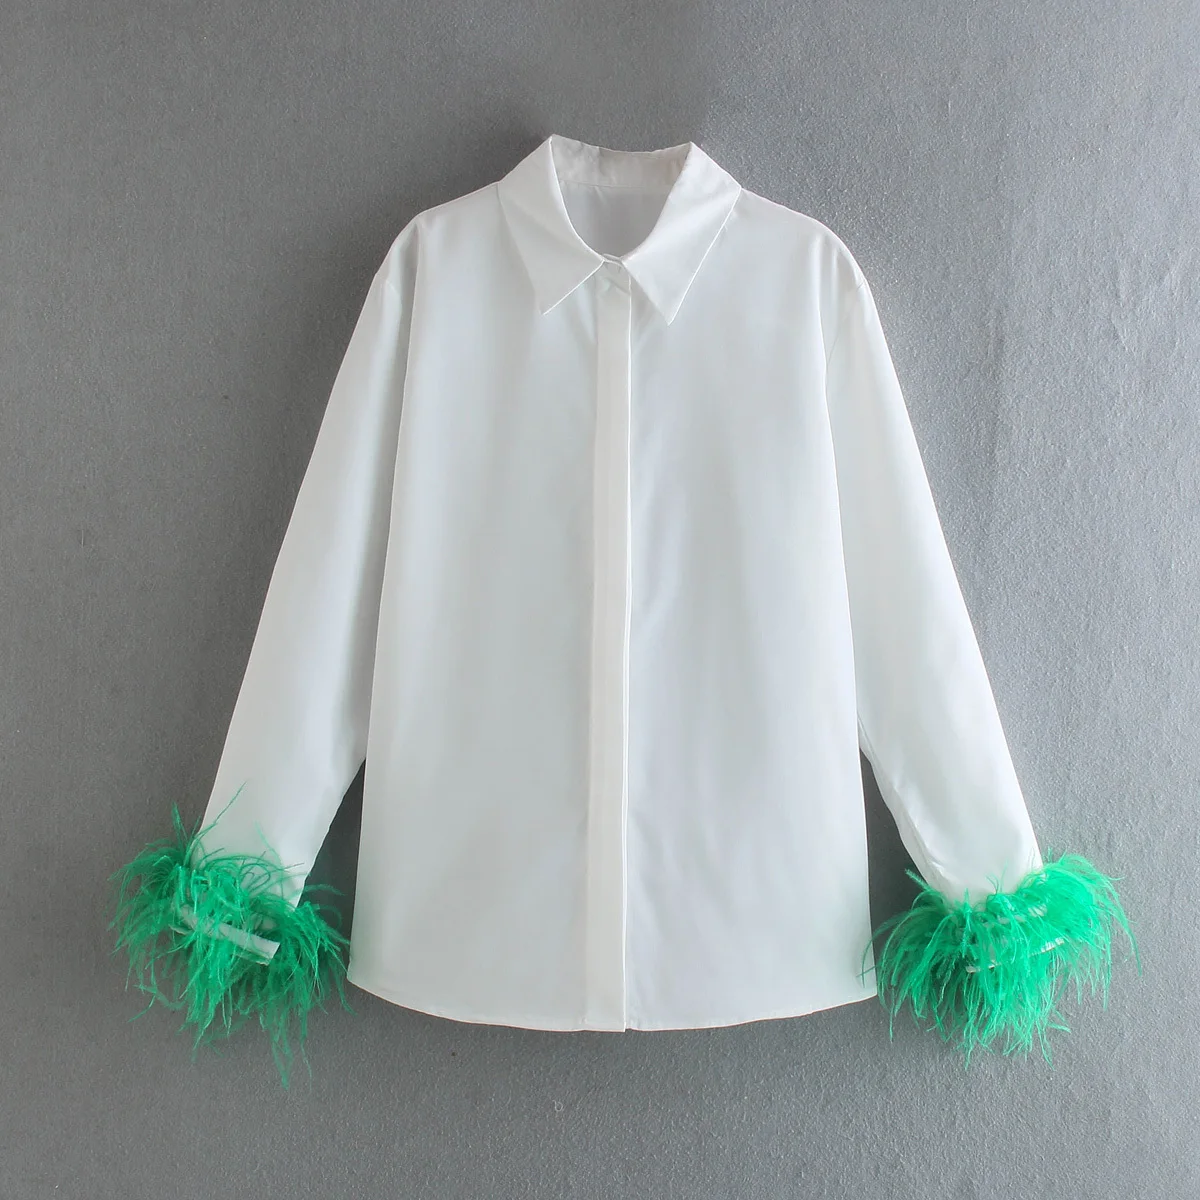 Green Feathers on the Cuffs Womens Blouses Long Sleeves Women's Clothing White Elegant Female Blouses Tops Shirts for Women Top